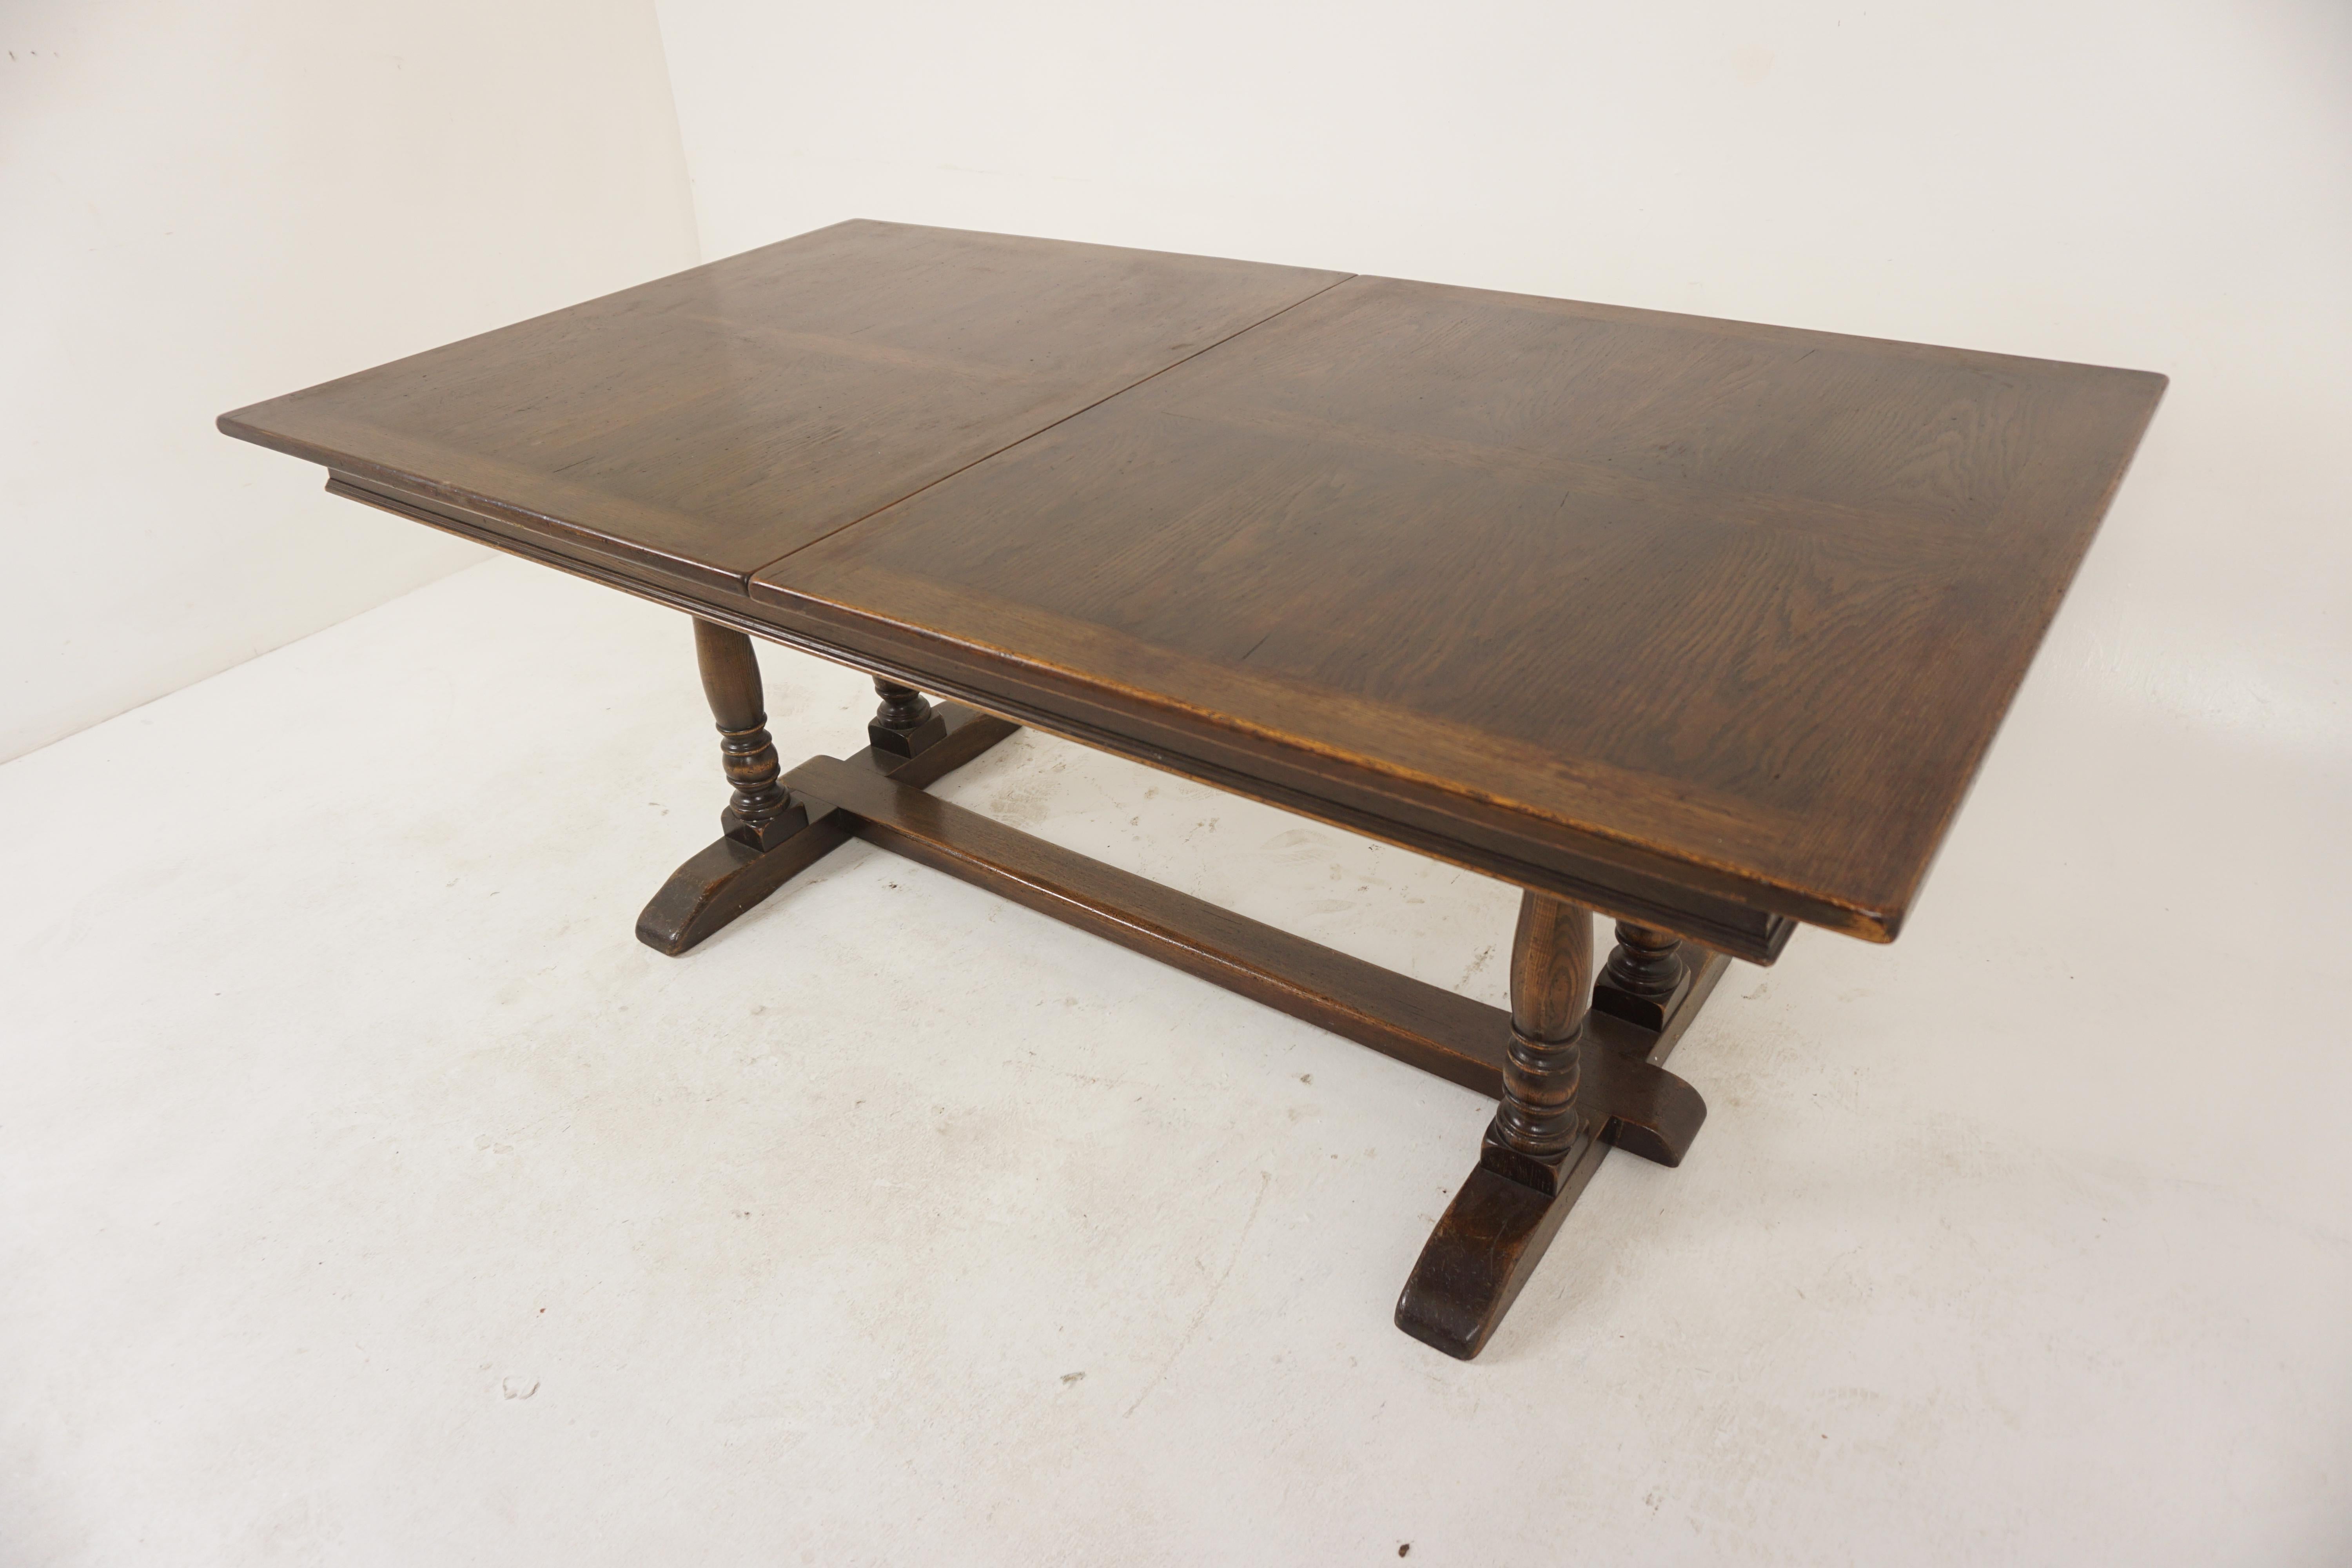 Vintage Double Pedestal Draw leaf Refectory, Farmhouse Table, Scotland 1930, H1174

Scotland 1930
Solid Oak and veneer
Original finish
Rectangular moulded top with parquet patterned design
Opens in the center by pulling on each end
Single leaf